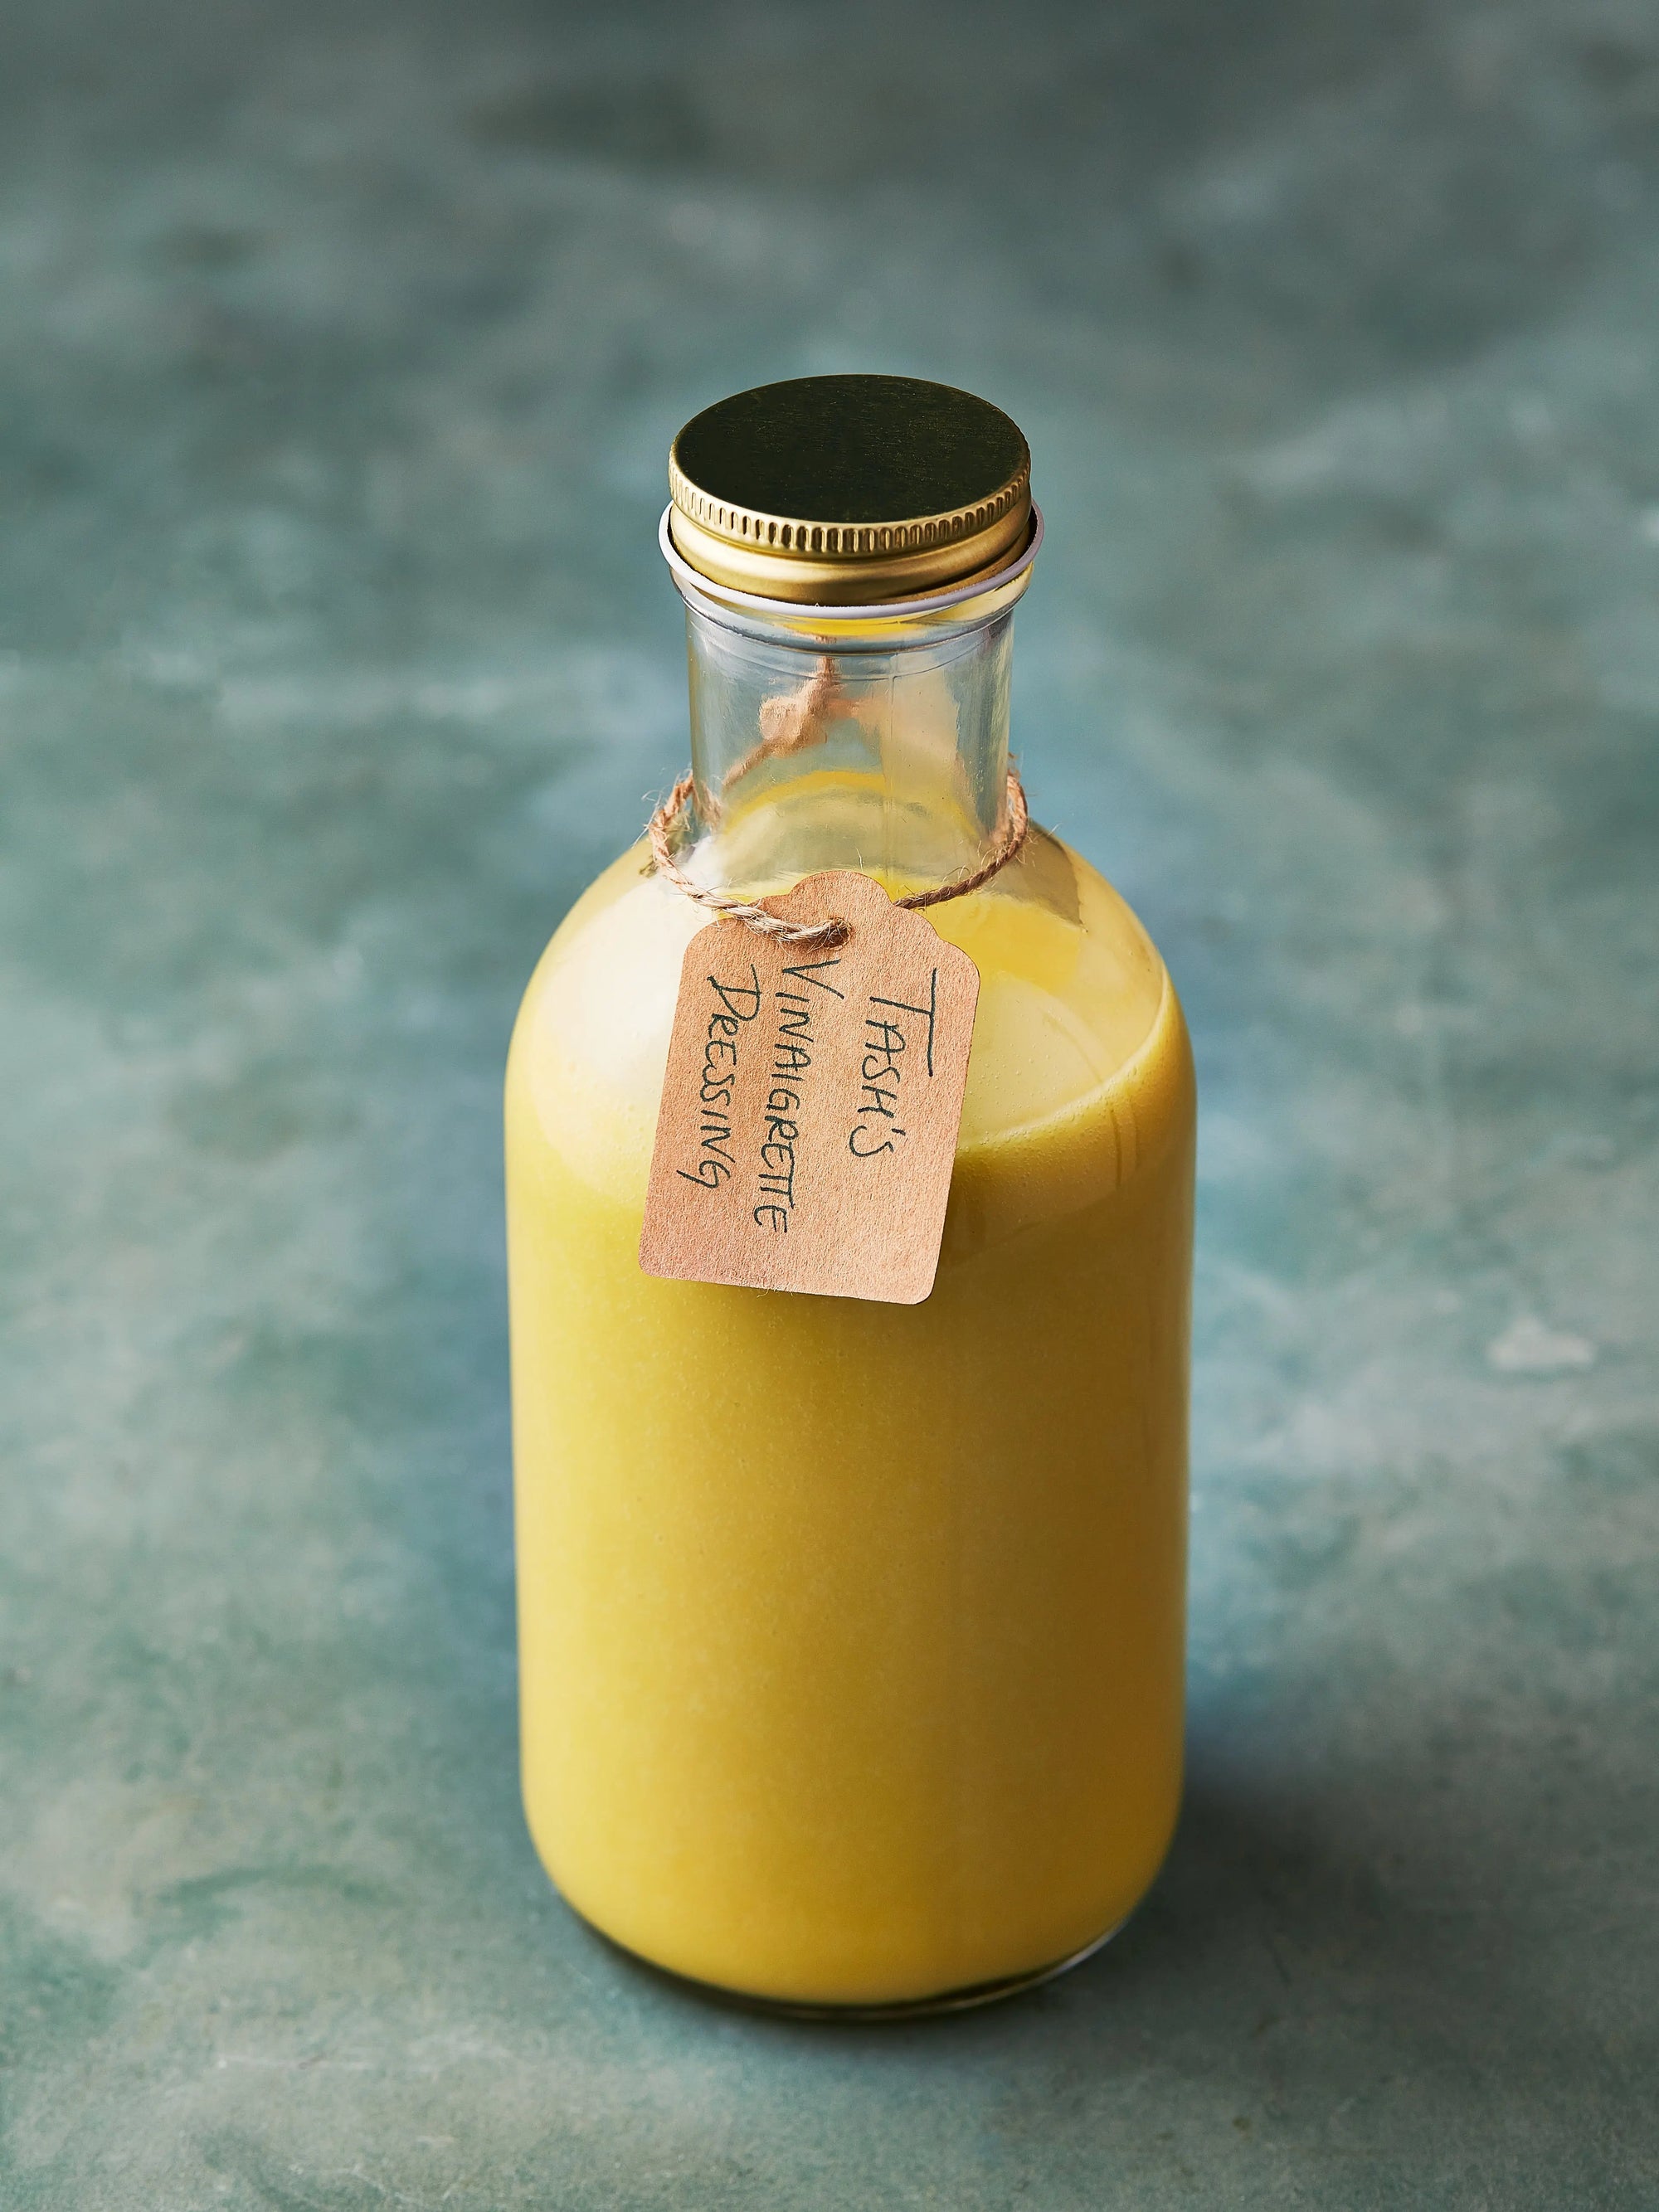 Tash's Vinaigrette provided by Laroot World, an organic, local, gluten free New York City flexitarian, pescatarian, carnitarian, vegan, and vegetarian meal delivery service 